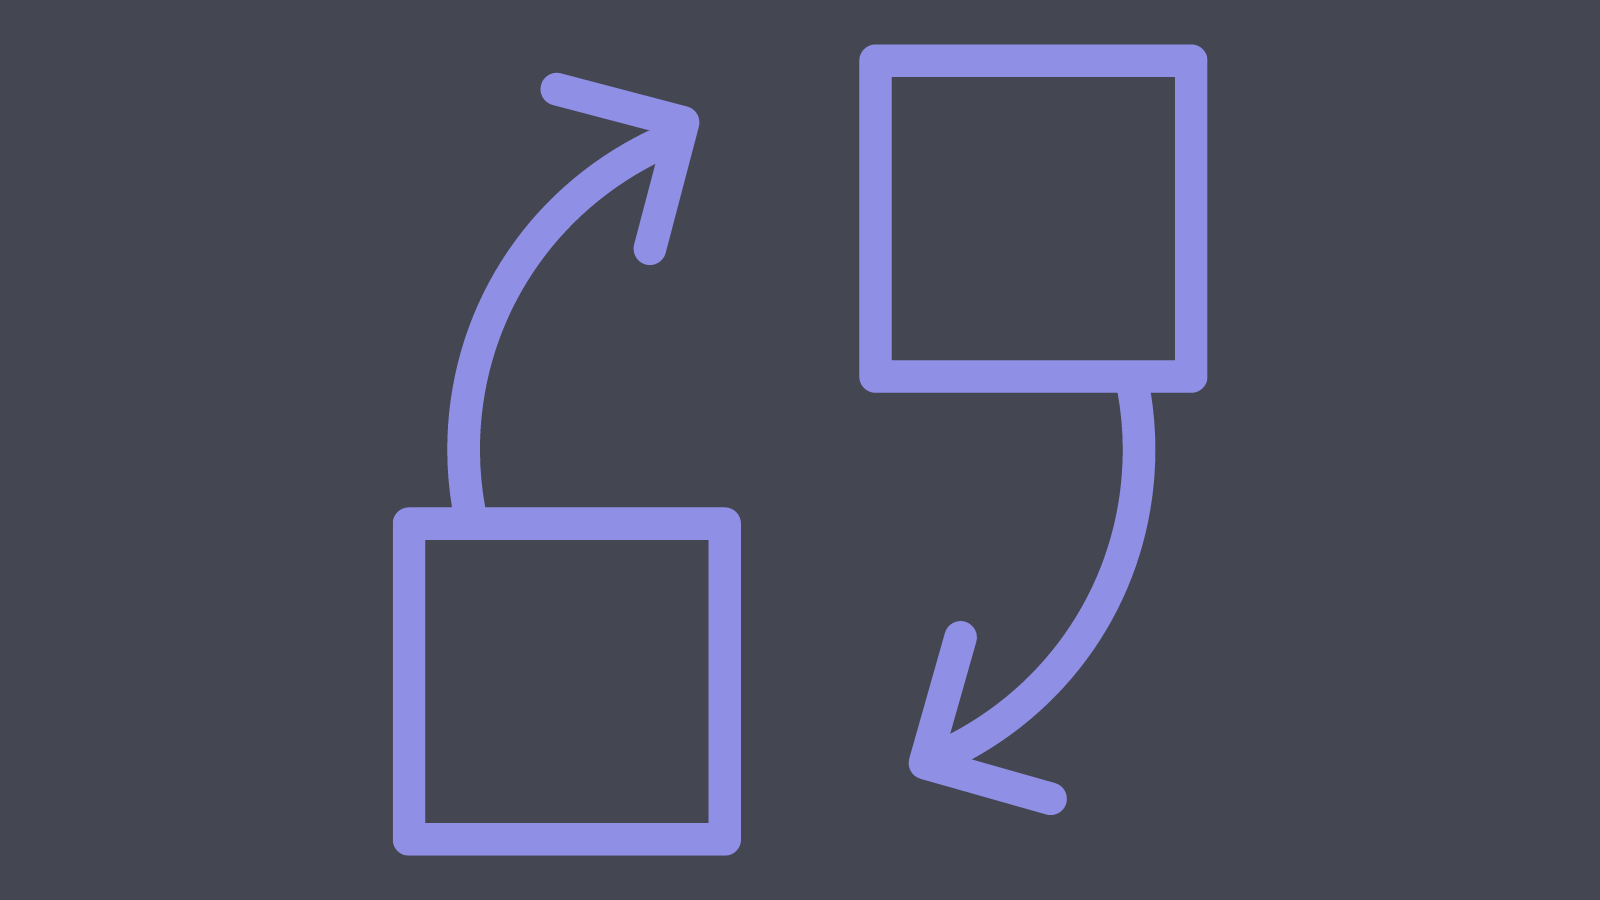 Two boxes with arrows pointing to each other in a circle formation